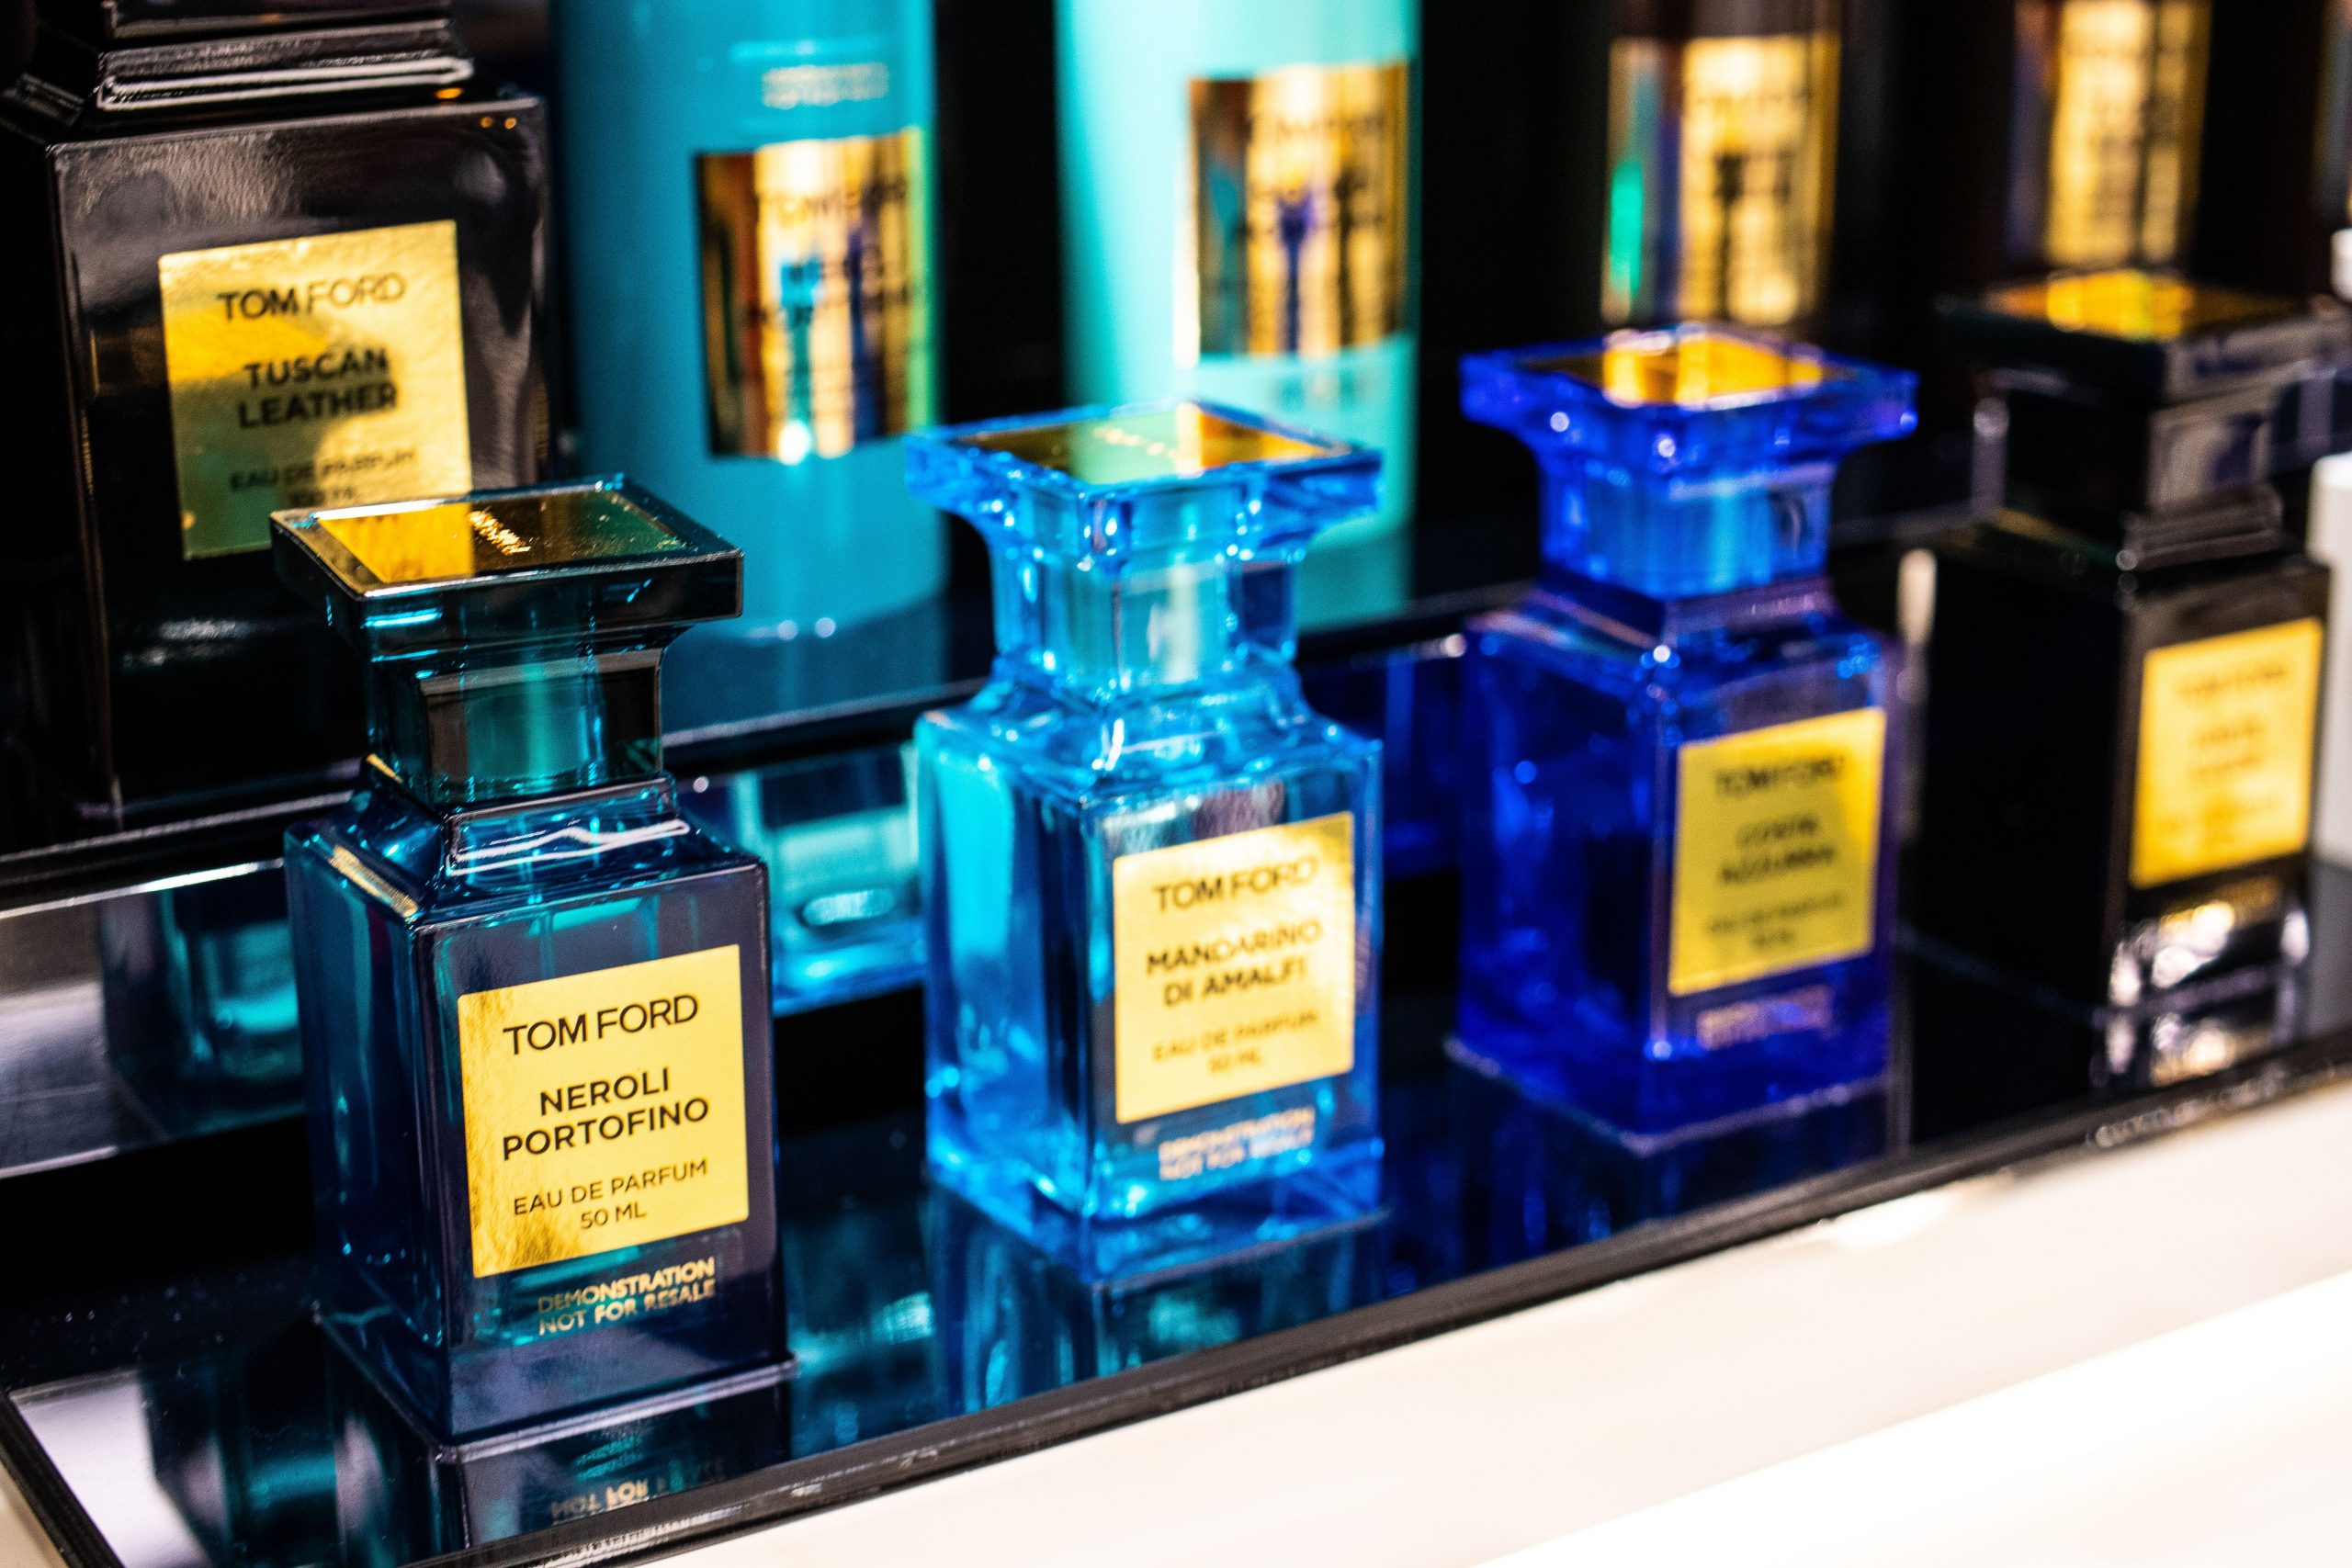 Estée Lauder set to announce $ acquisition of Tom Ford - TheIndustry. beauty